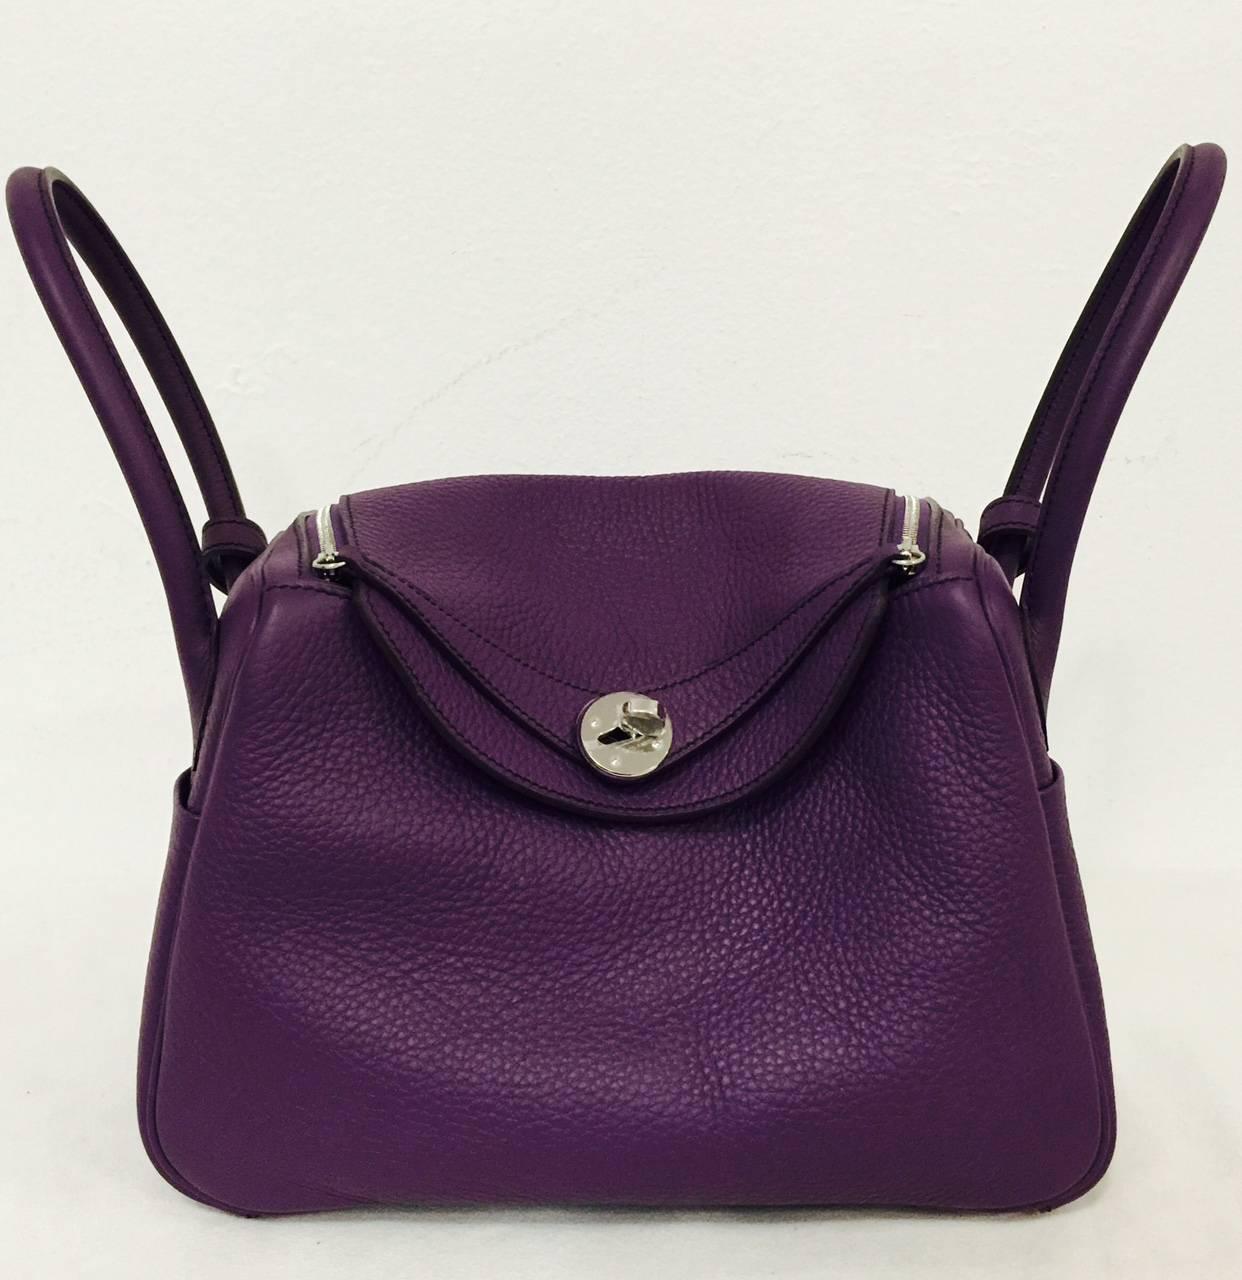 This New Lindy 26 has become a highly coveted bag by the world's preeminent luxury goods house, Hermes! Crafted from exquisite Clemence leather and sporting an unforgettable Purple hue with palladium hardware, this showstopper is a must for any